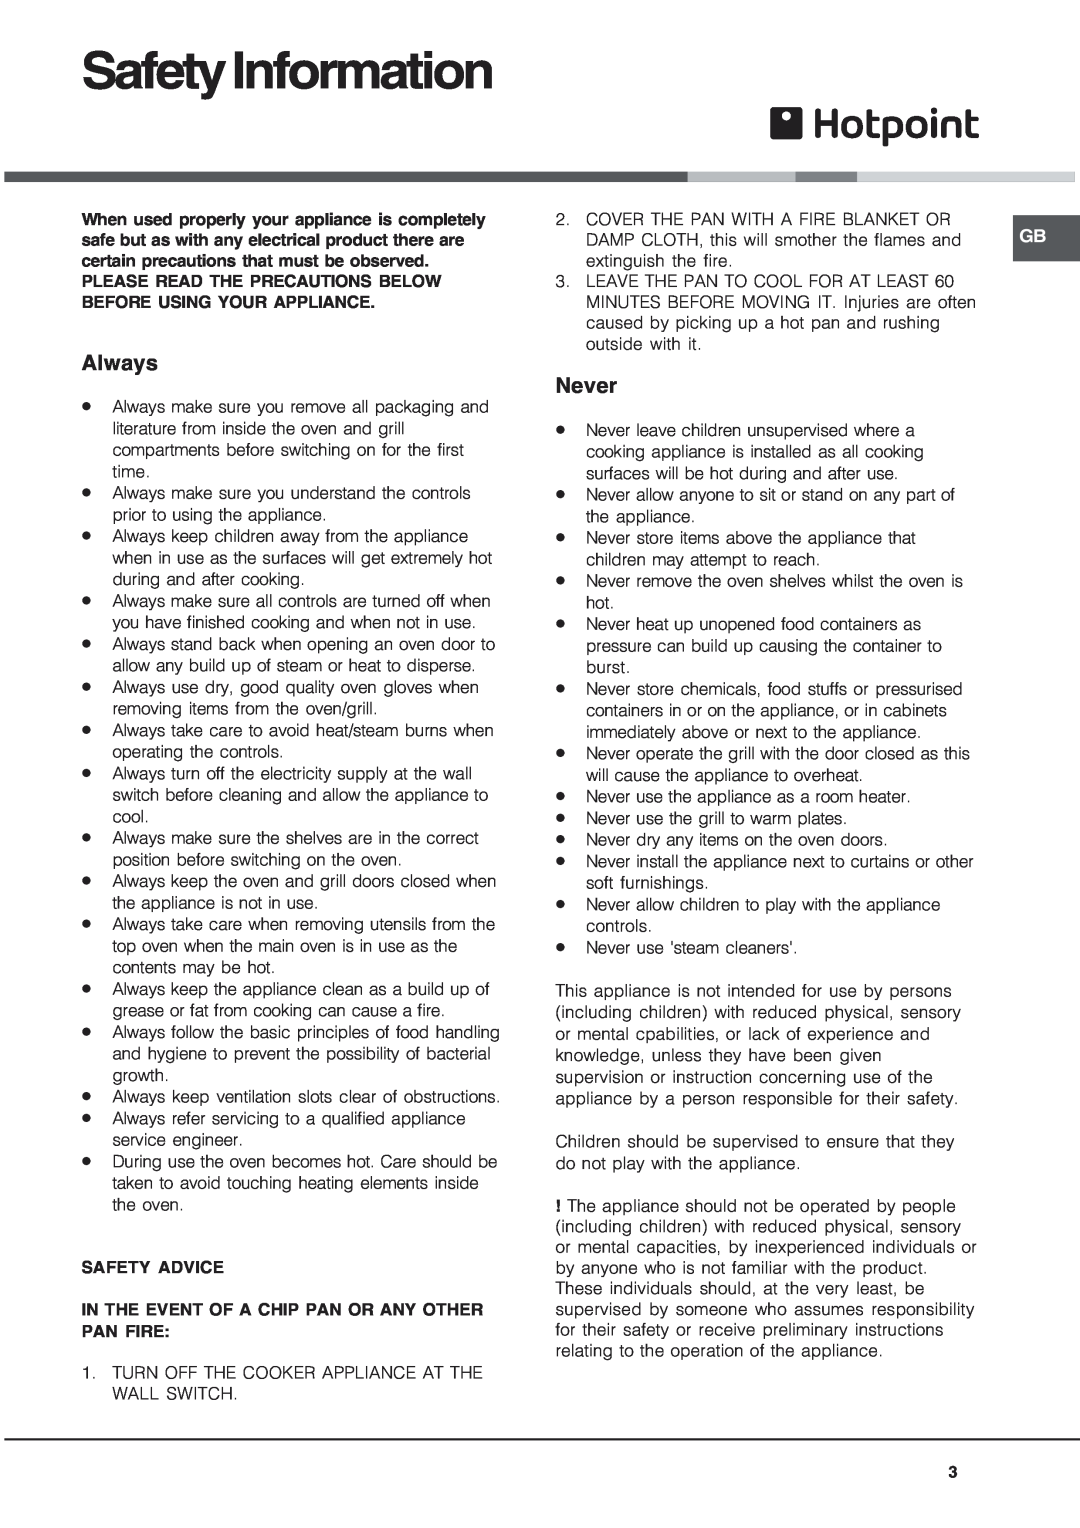 Hotpoint UQ89I manual SafetyInformation, Always, Never, Please Read The Precautions Below Before Using Your Appliance 